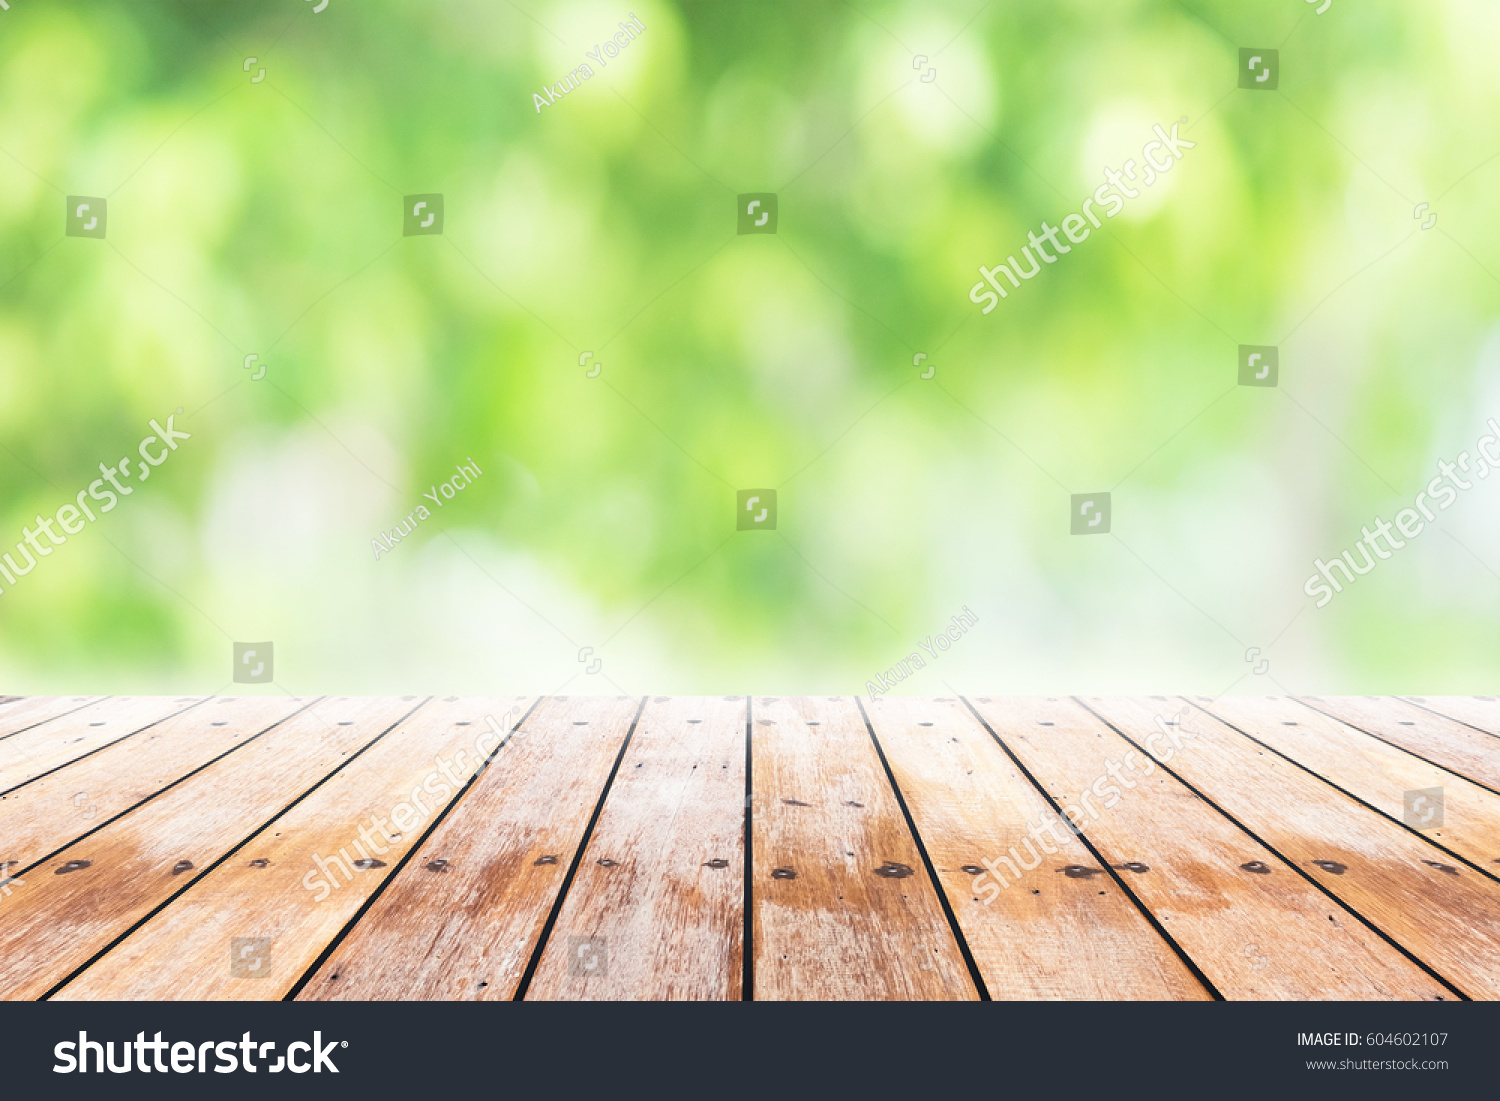 Empty Wooden Table Blurred City Park Stock Photo 604602107 | Shutterstock